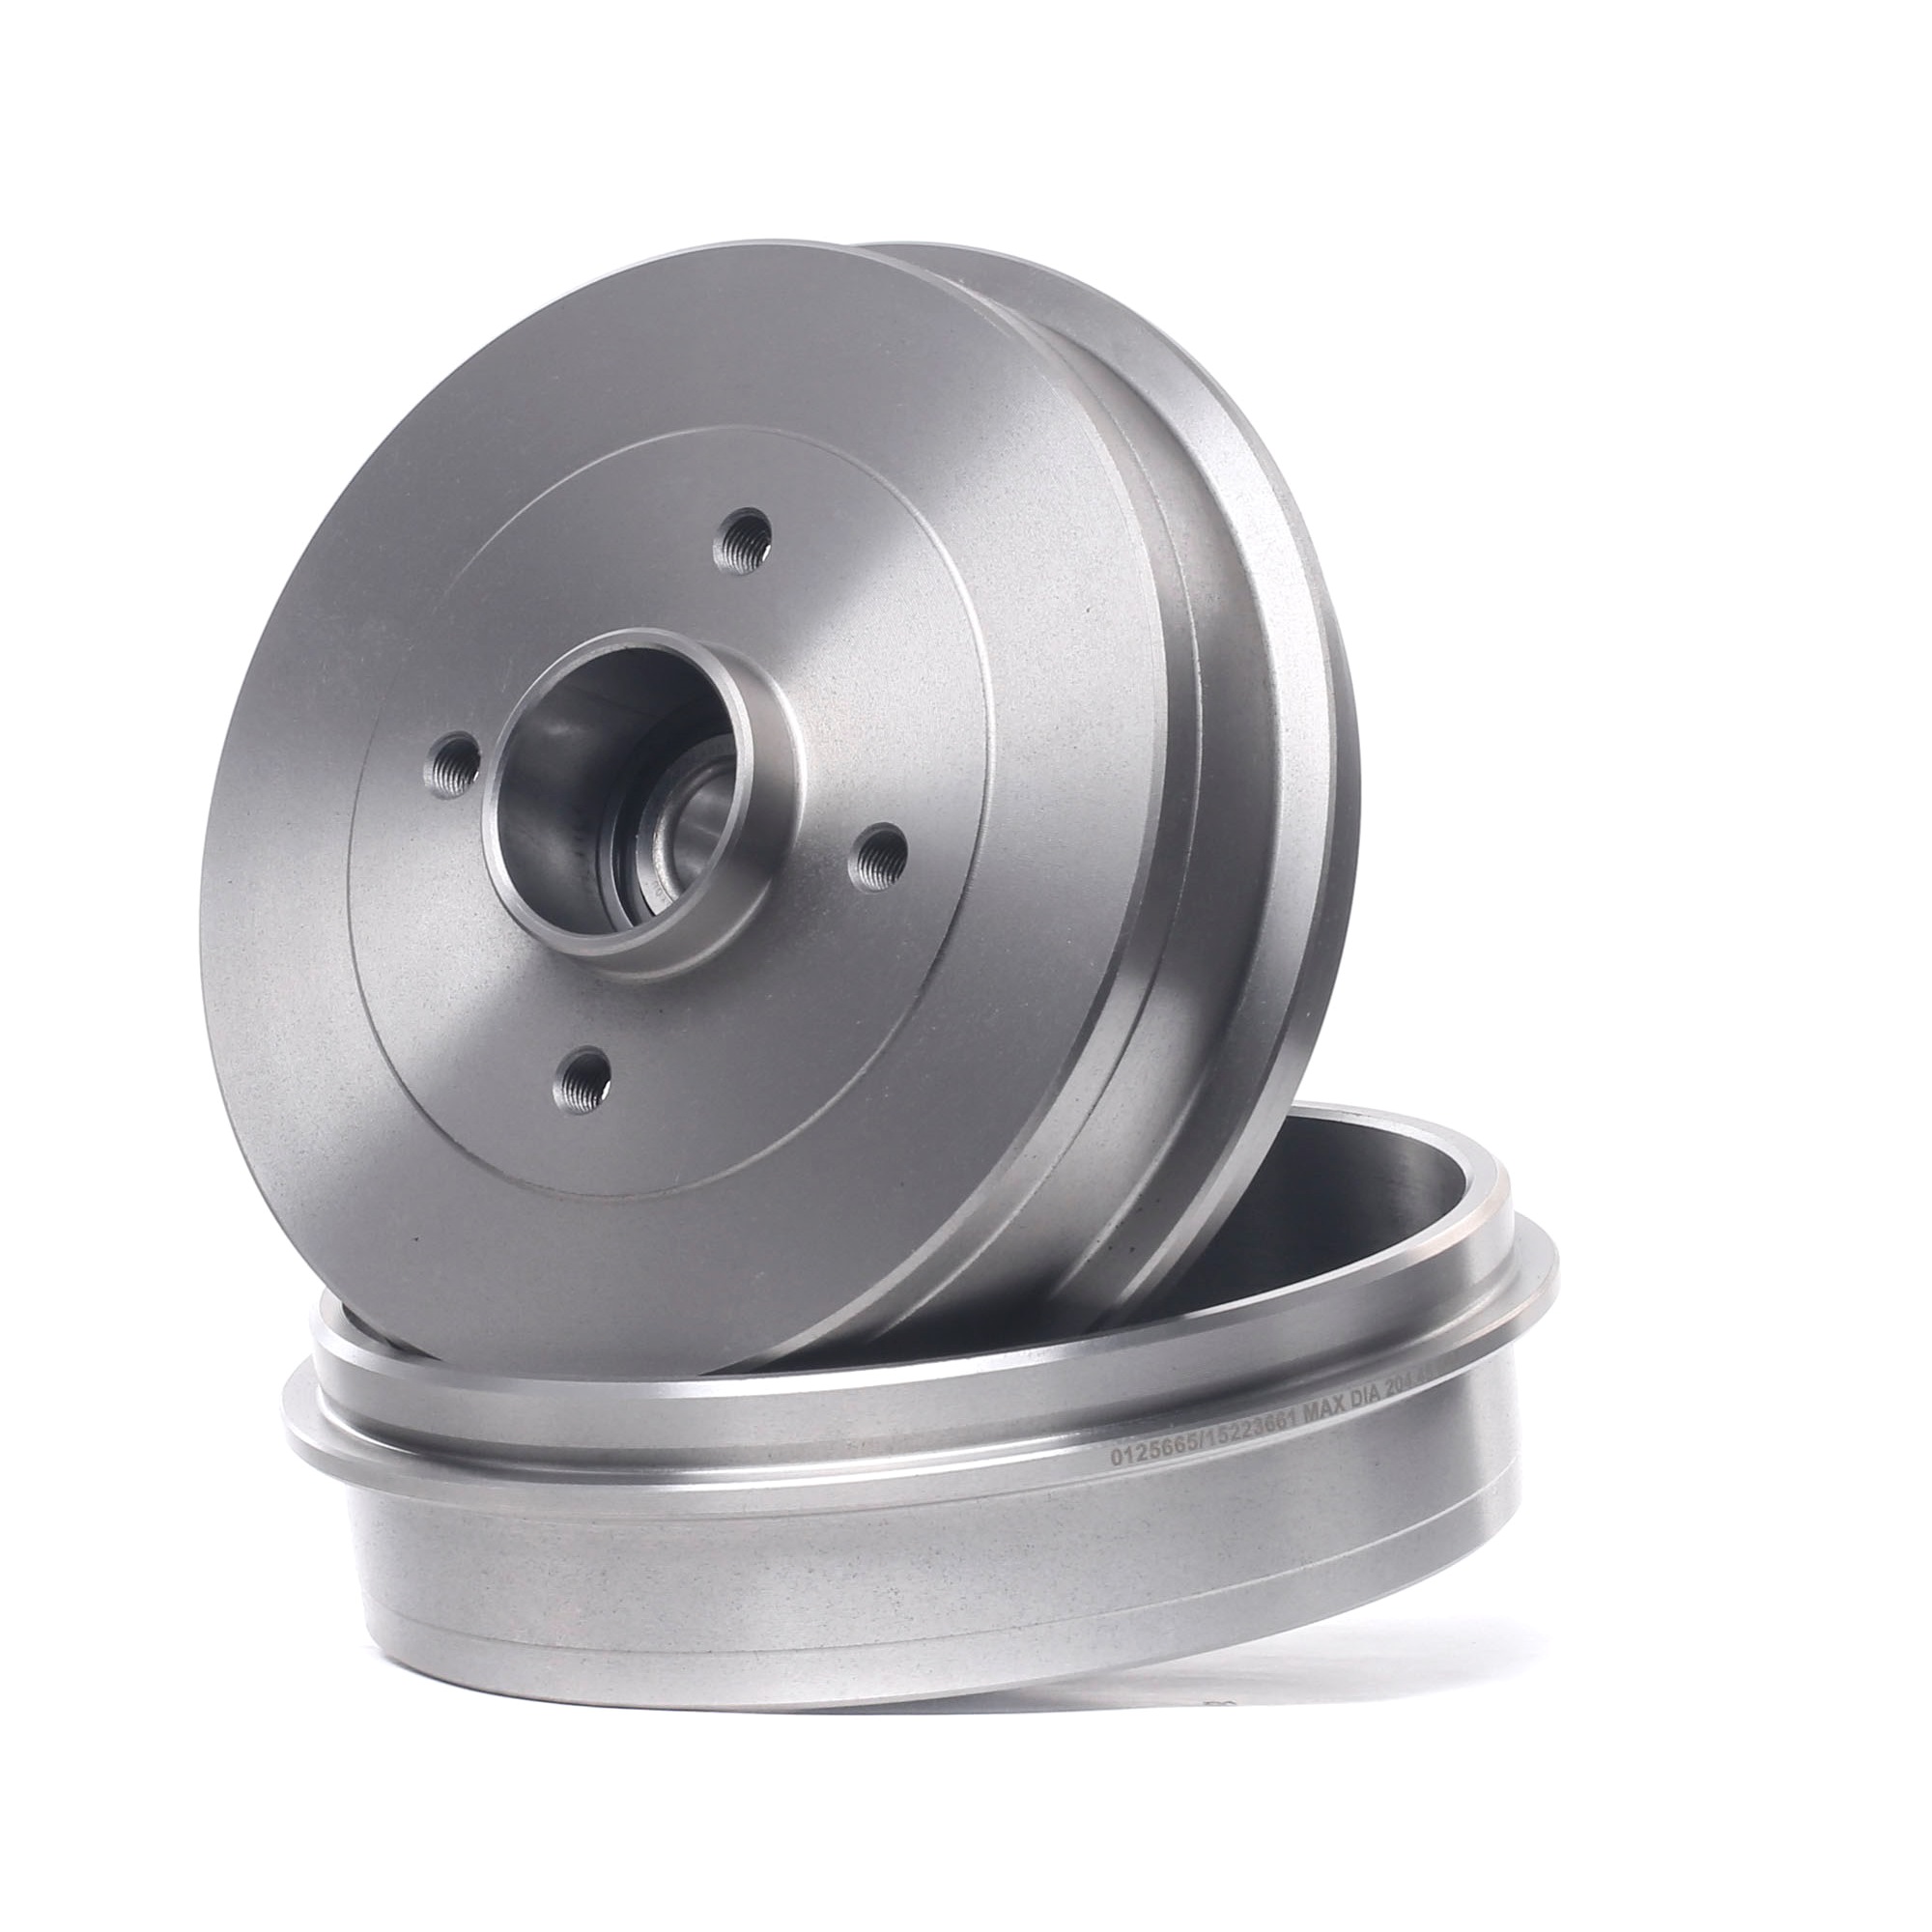 SKBDM-0800232 STARK Brake drum RENAULT with accessories, with integrated wheel bearing, with integrated magnetic sensor ring, with bearing(s), with ABS sensor ring, 234,0mm, Rear Axle